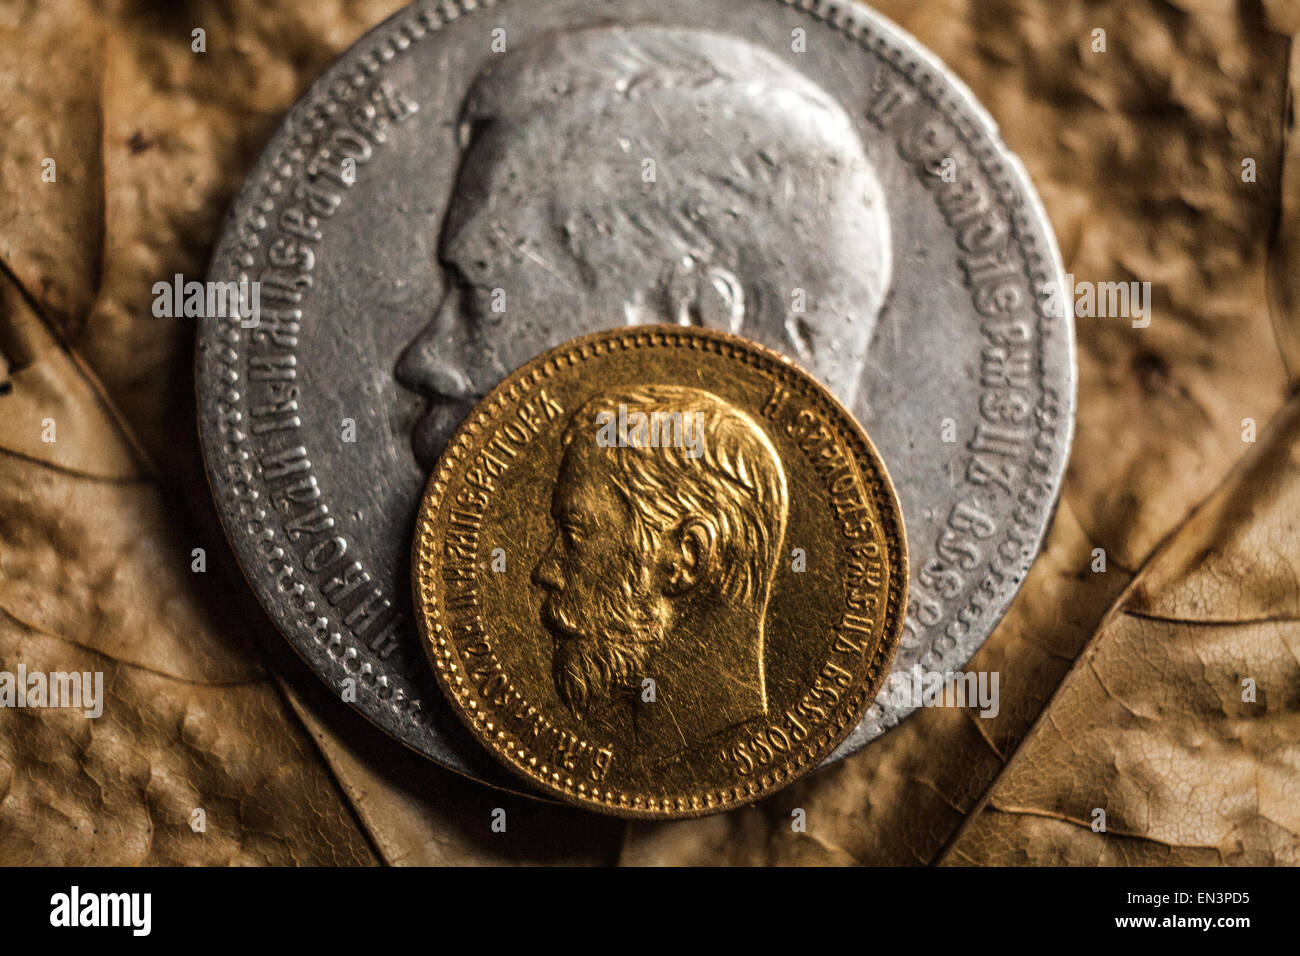 gold and silver coin rubles with a portrait of Nikolay II the last emperor of Russia Stock Photo